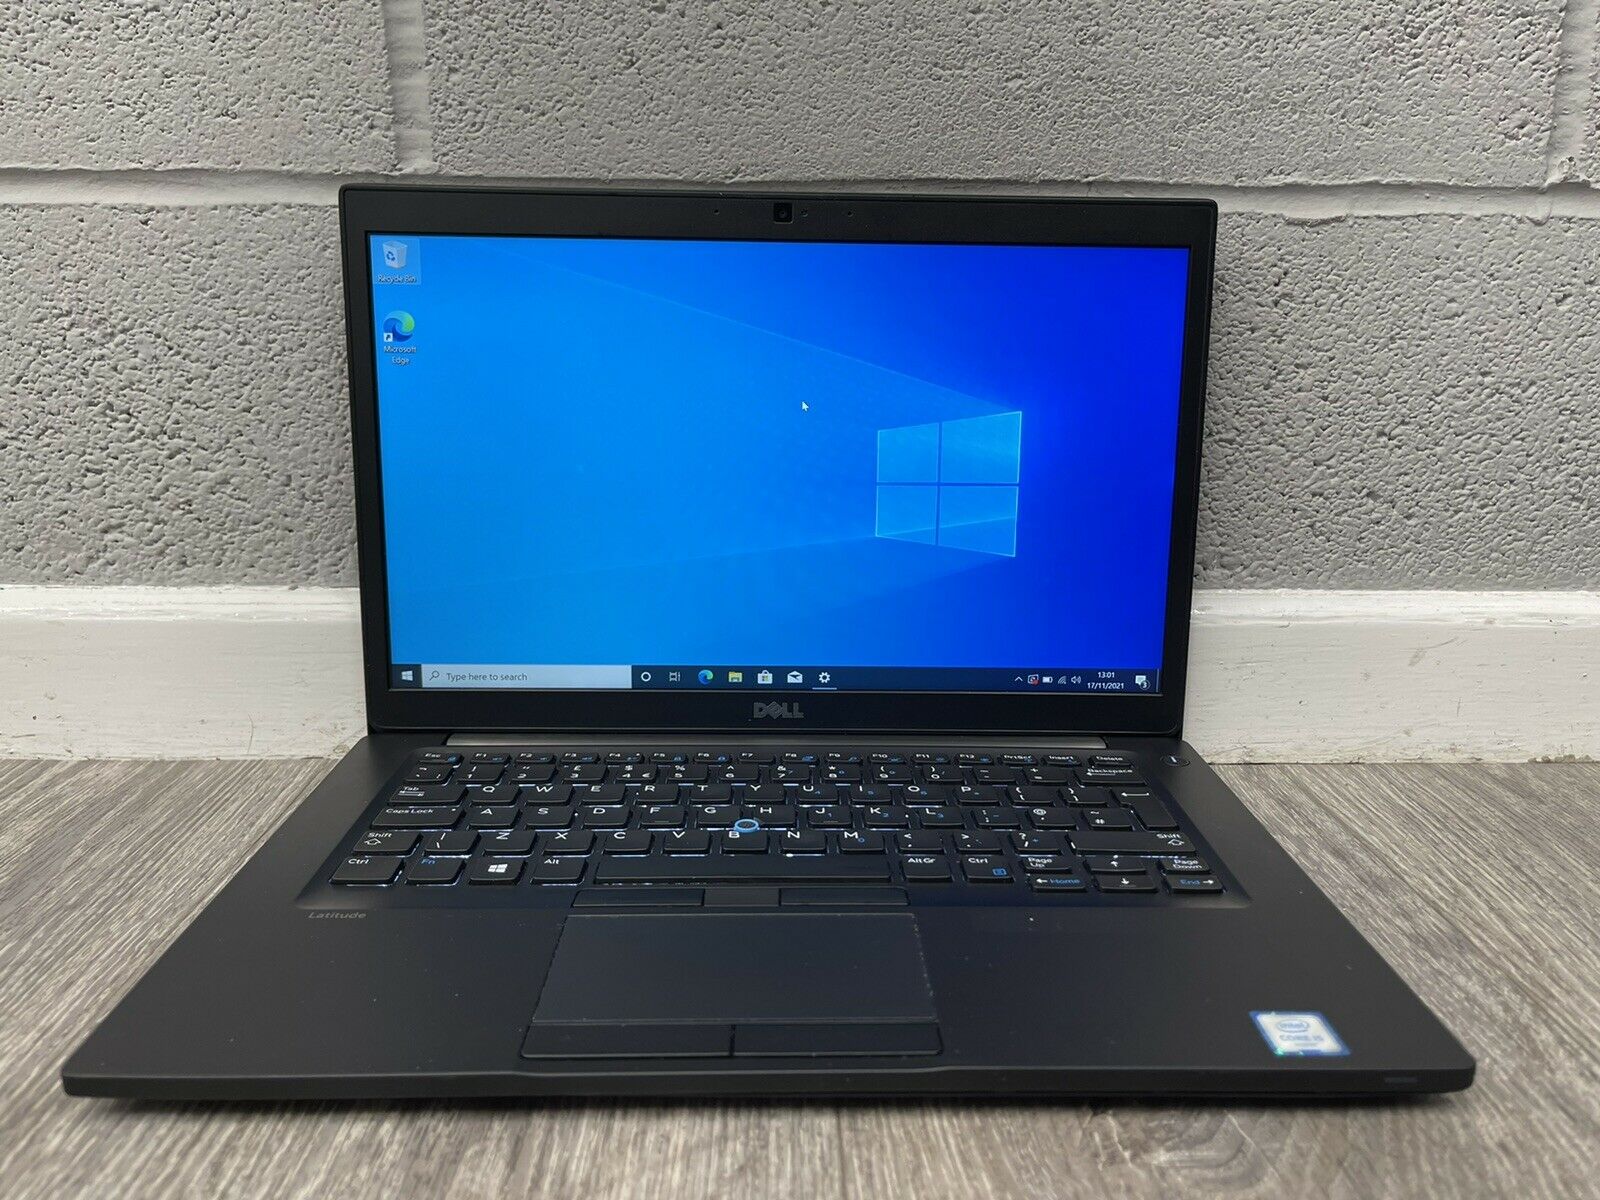 Dell Latitude 7480 Core i7 Used Laptop Price in Pakistan - Laptop Mall